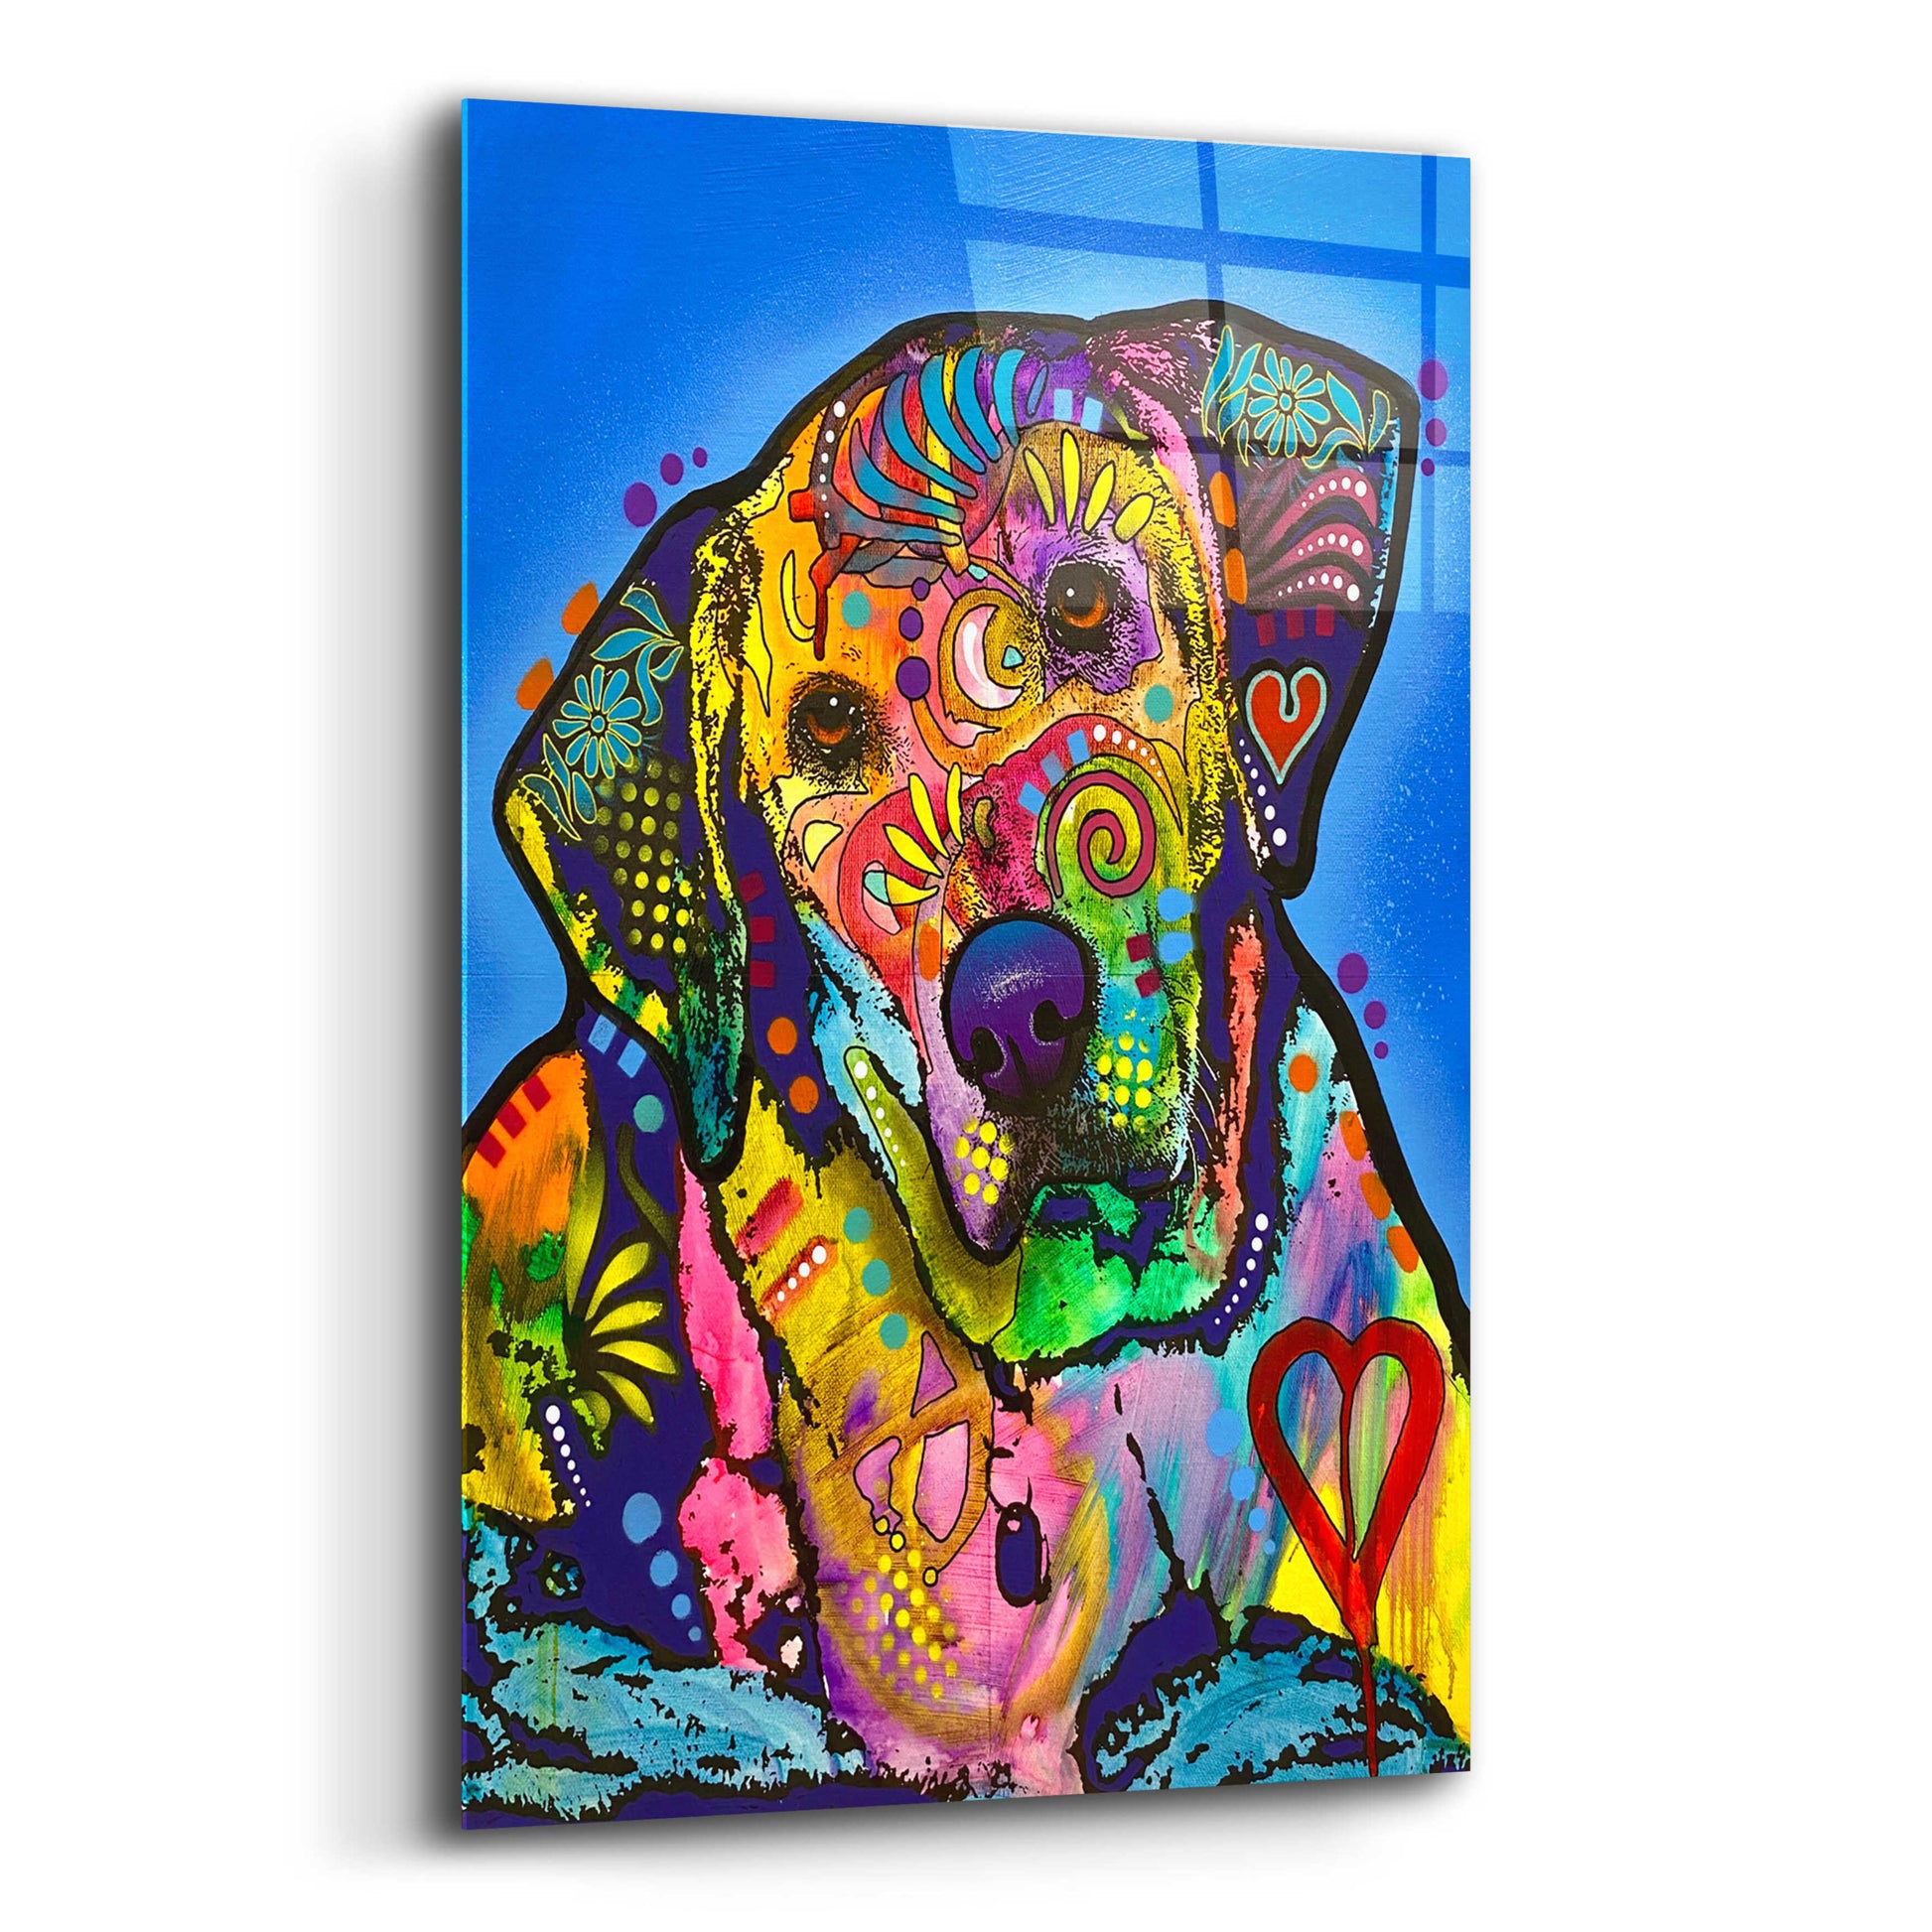 Epic Art 'Got Any Snacks' by Dean Russo, Acrylic Glass Wall Art,,16x24